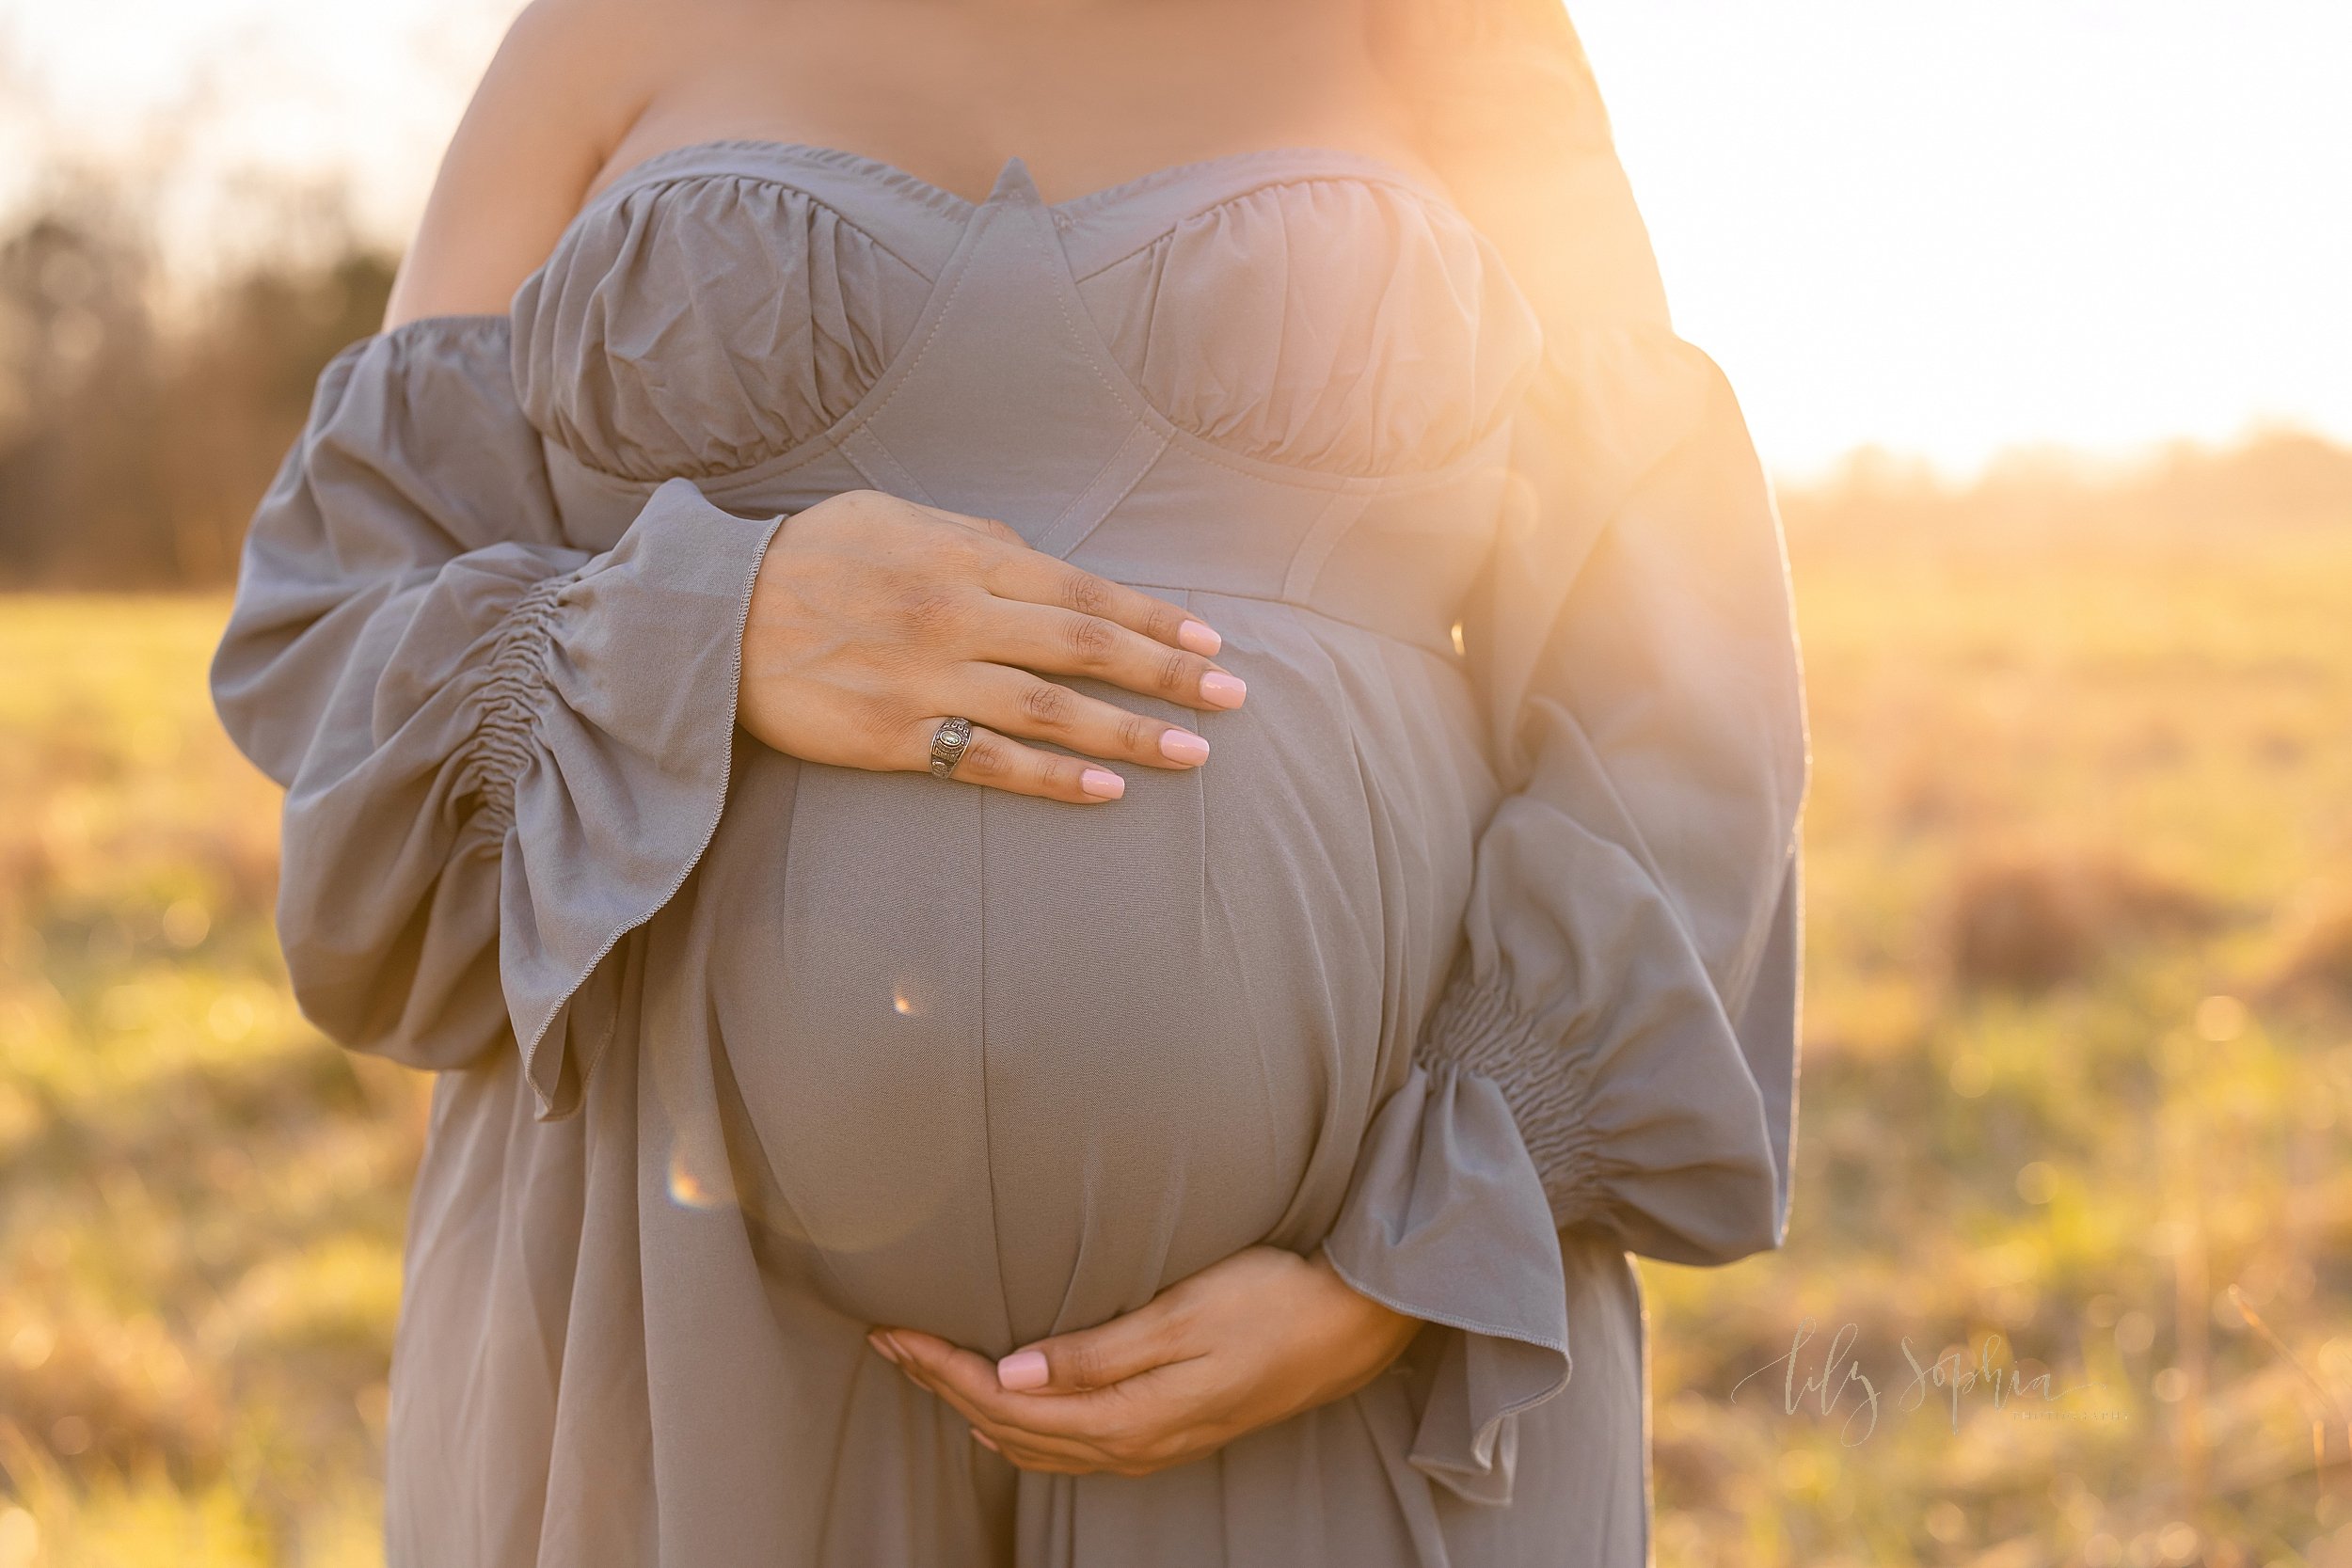  Close-up maternity picture of an expectant woman’s belly being framed by her hands as she stands in an Atlanta field at sunset. 